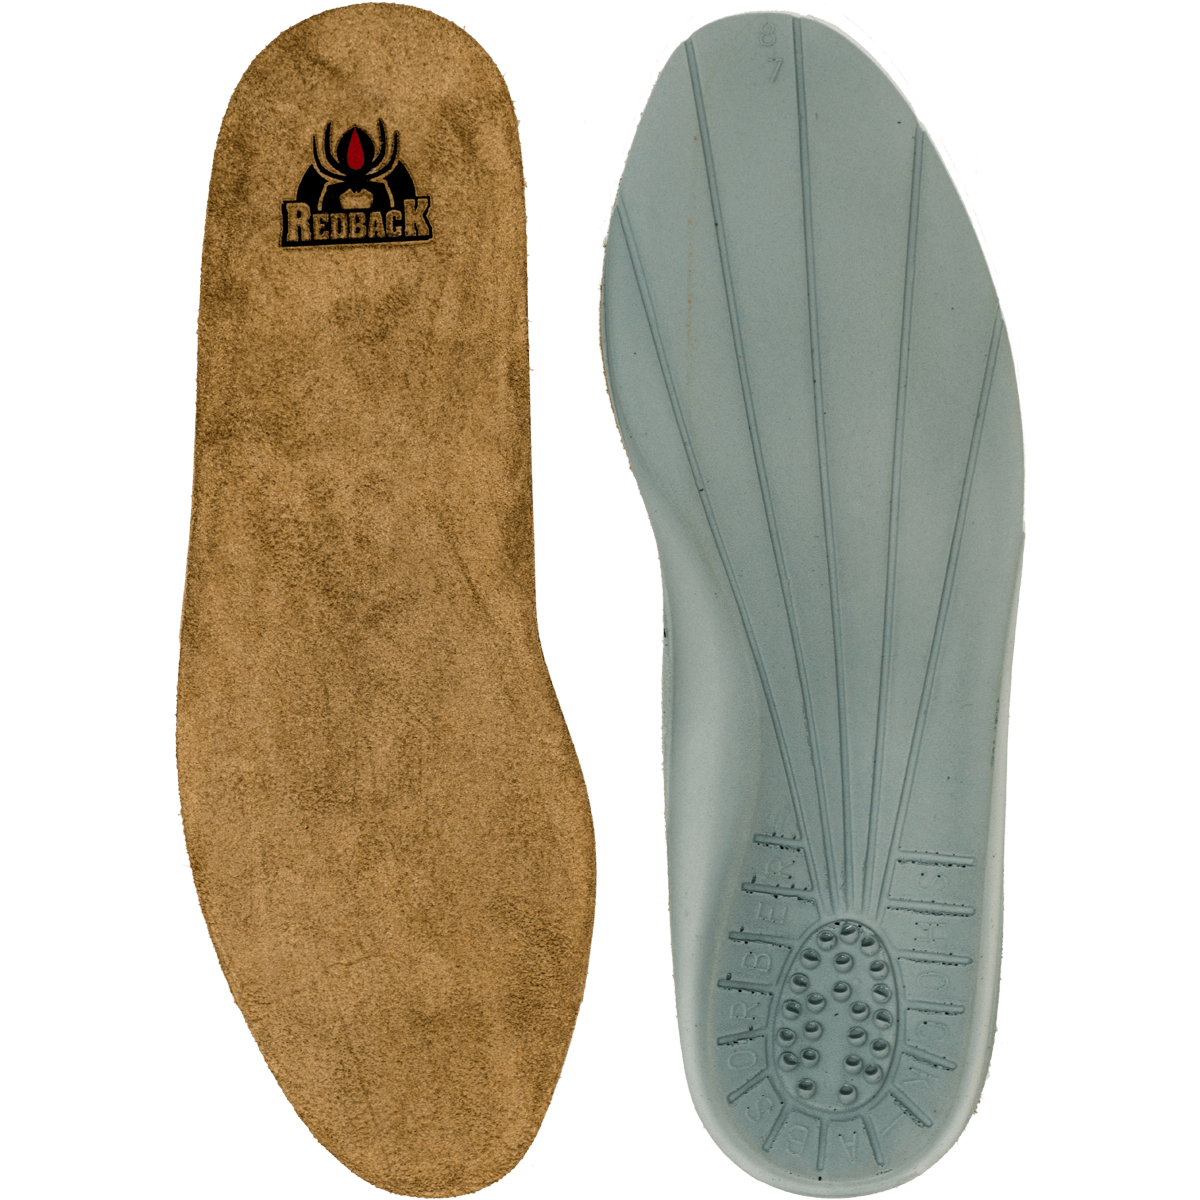 Shock Absorbing Insole